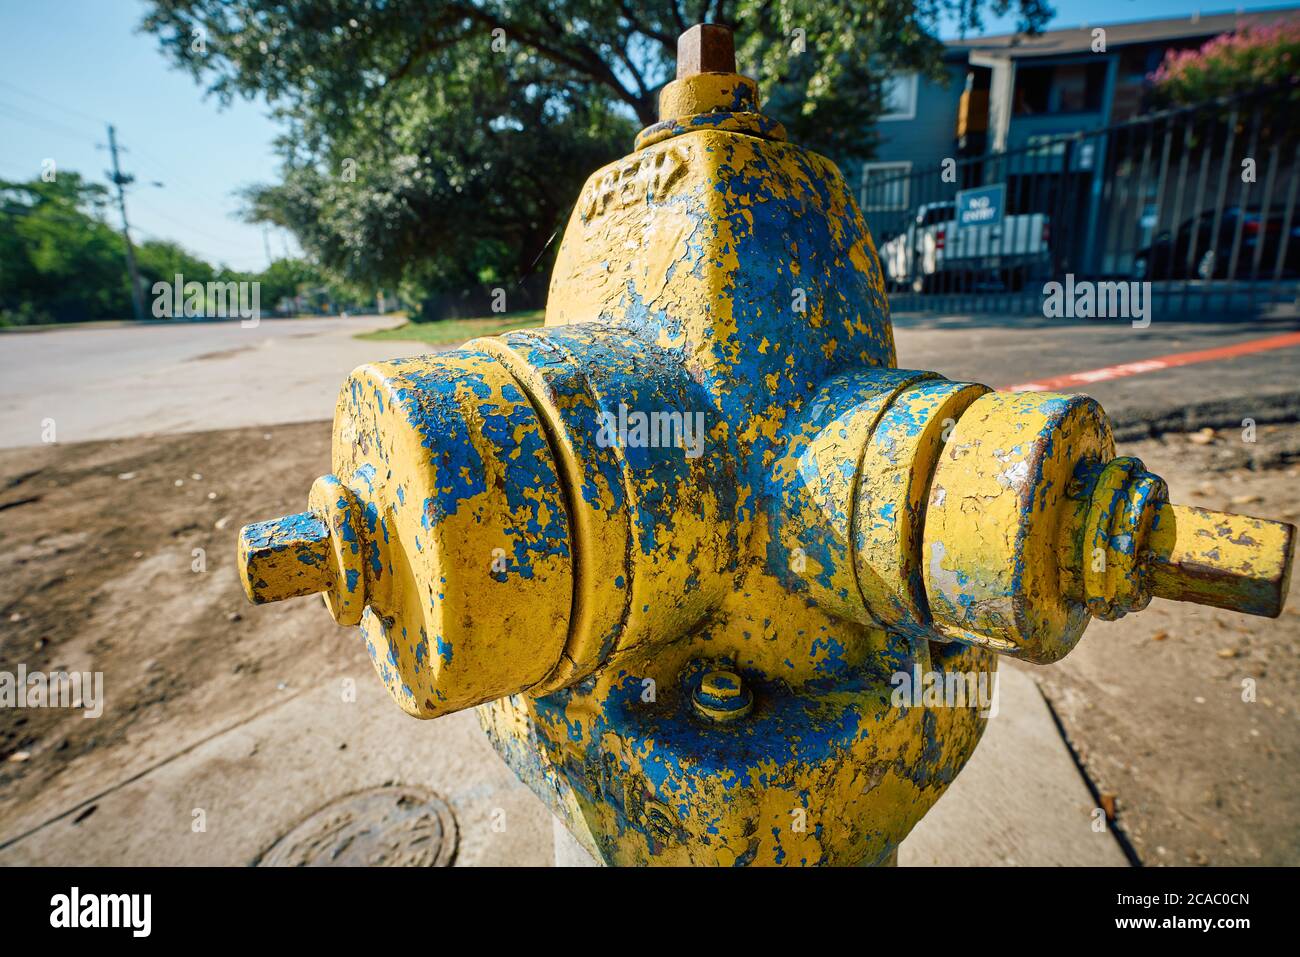 Street view of yellow fire hydrant Stock Photo